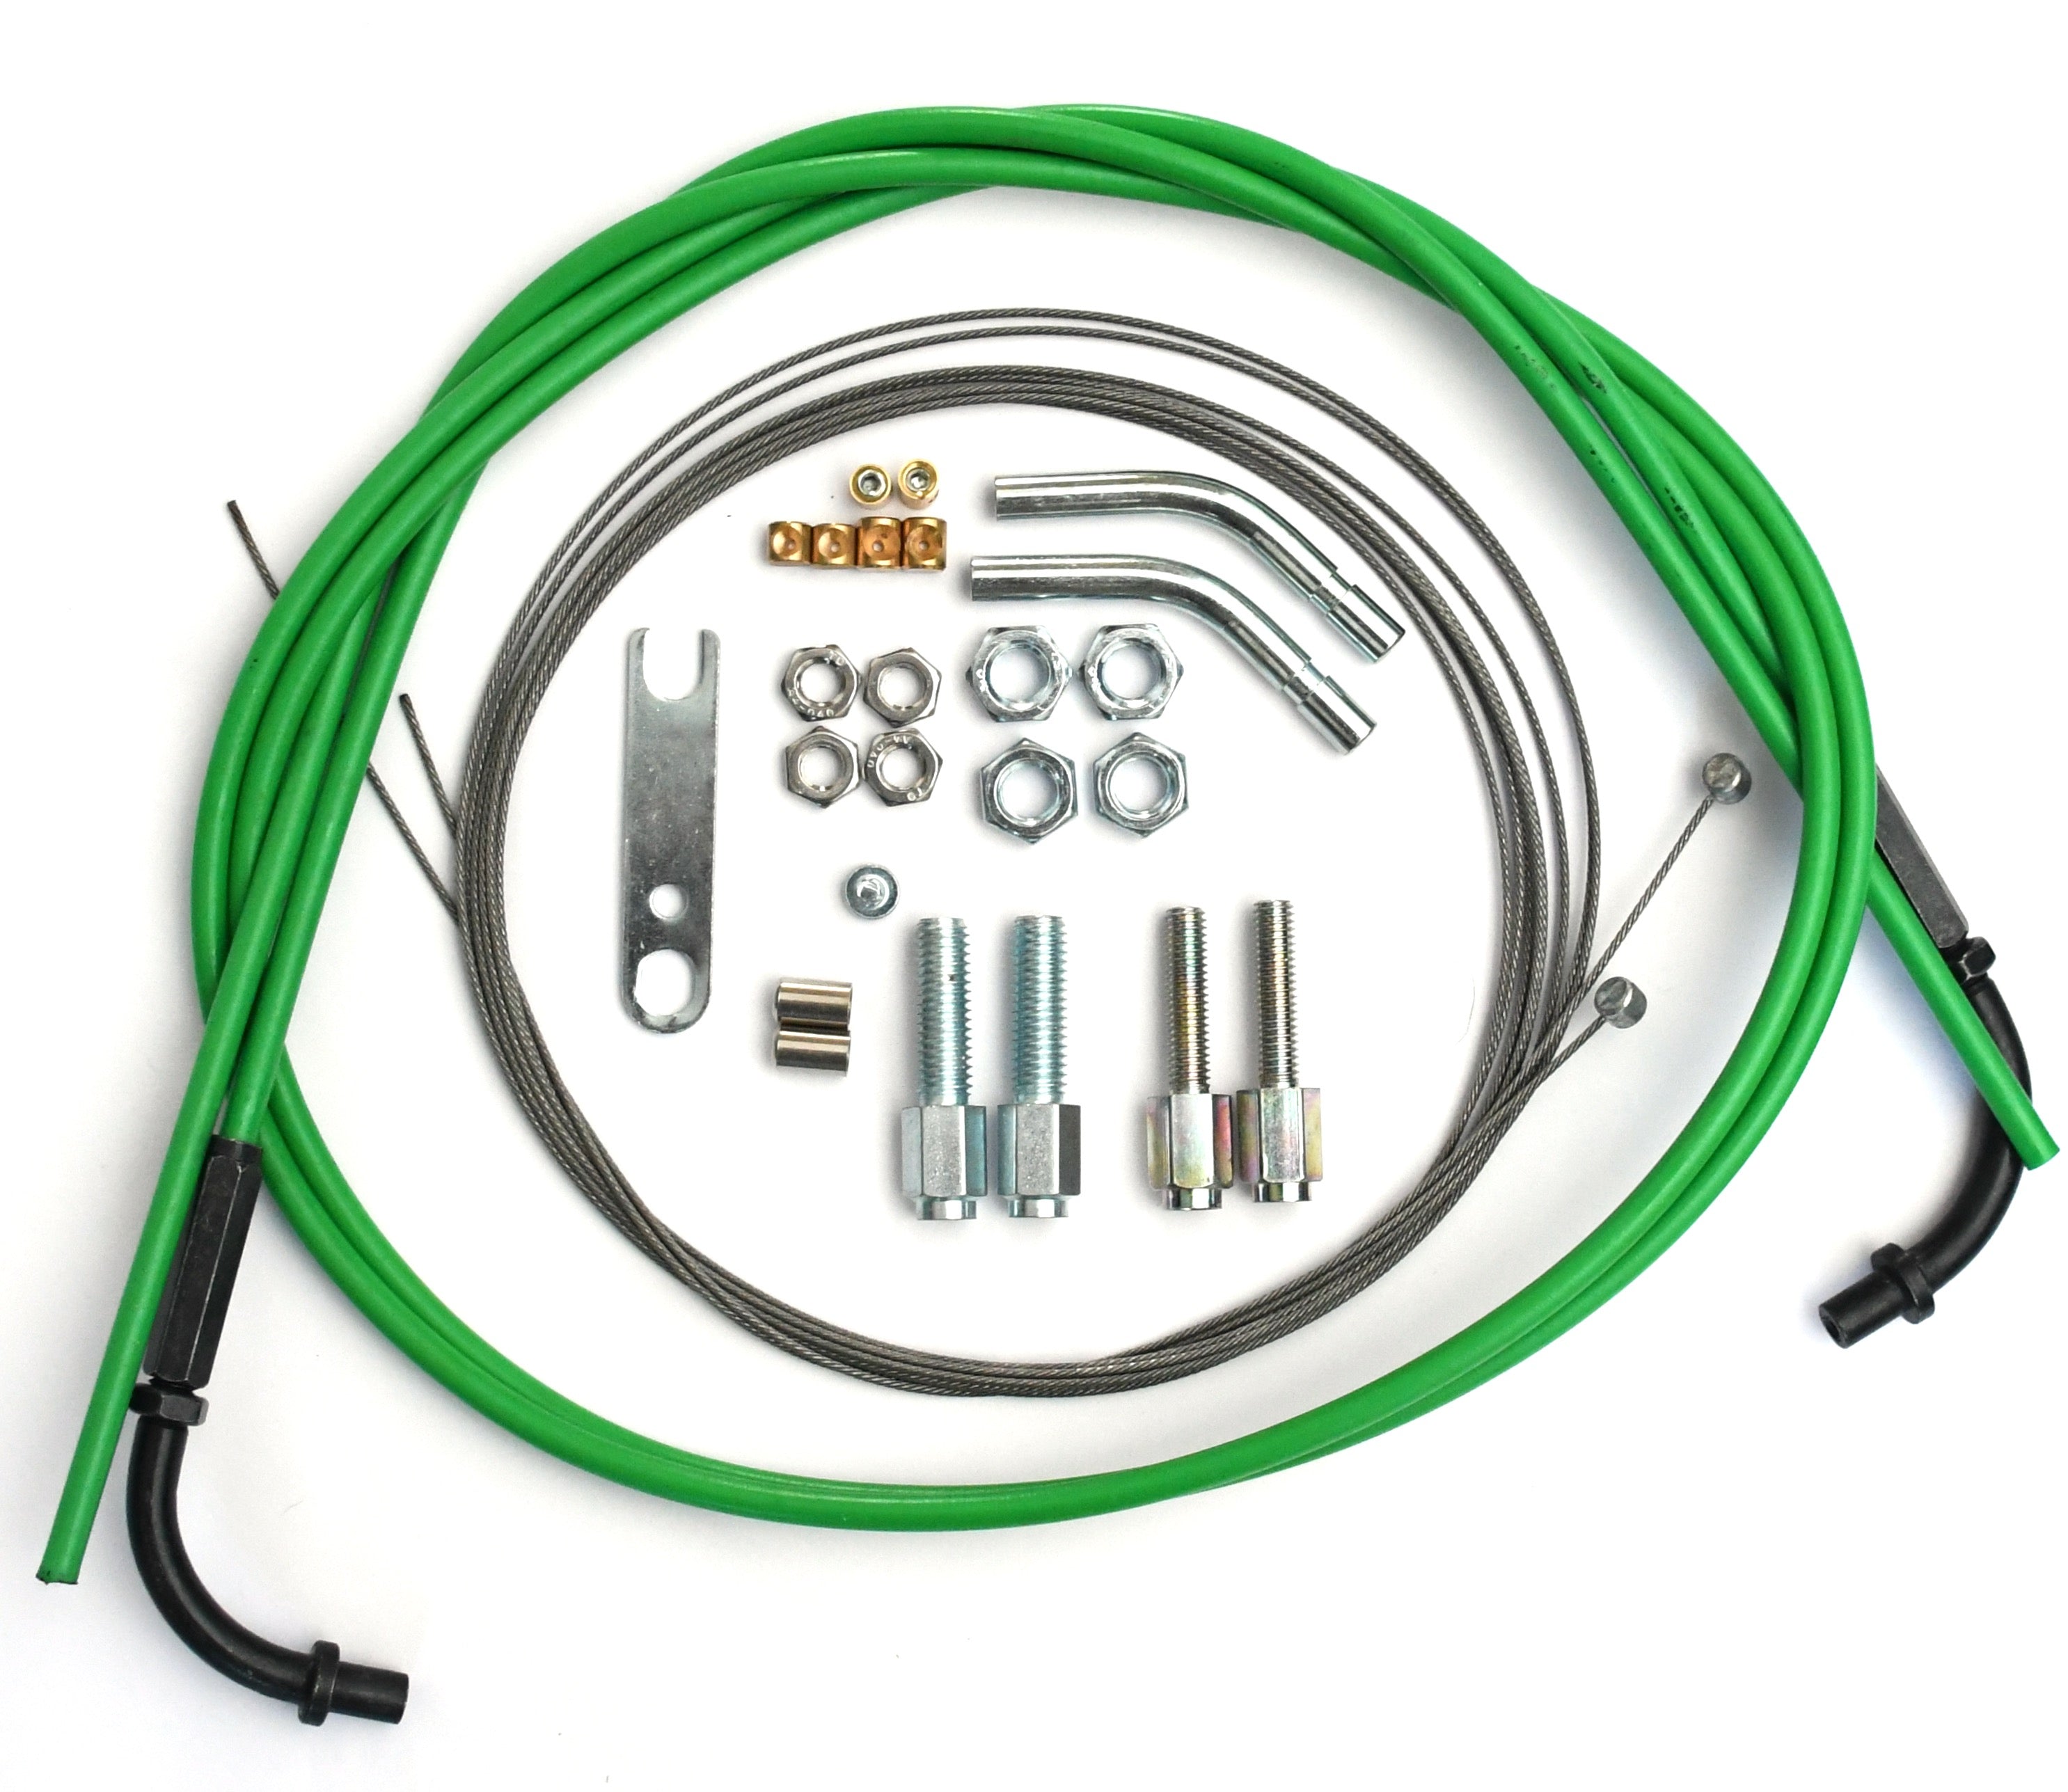 Venhill Universal Throttle Cable Kit for Domino XM2 Throttle 2M